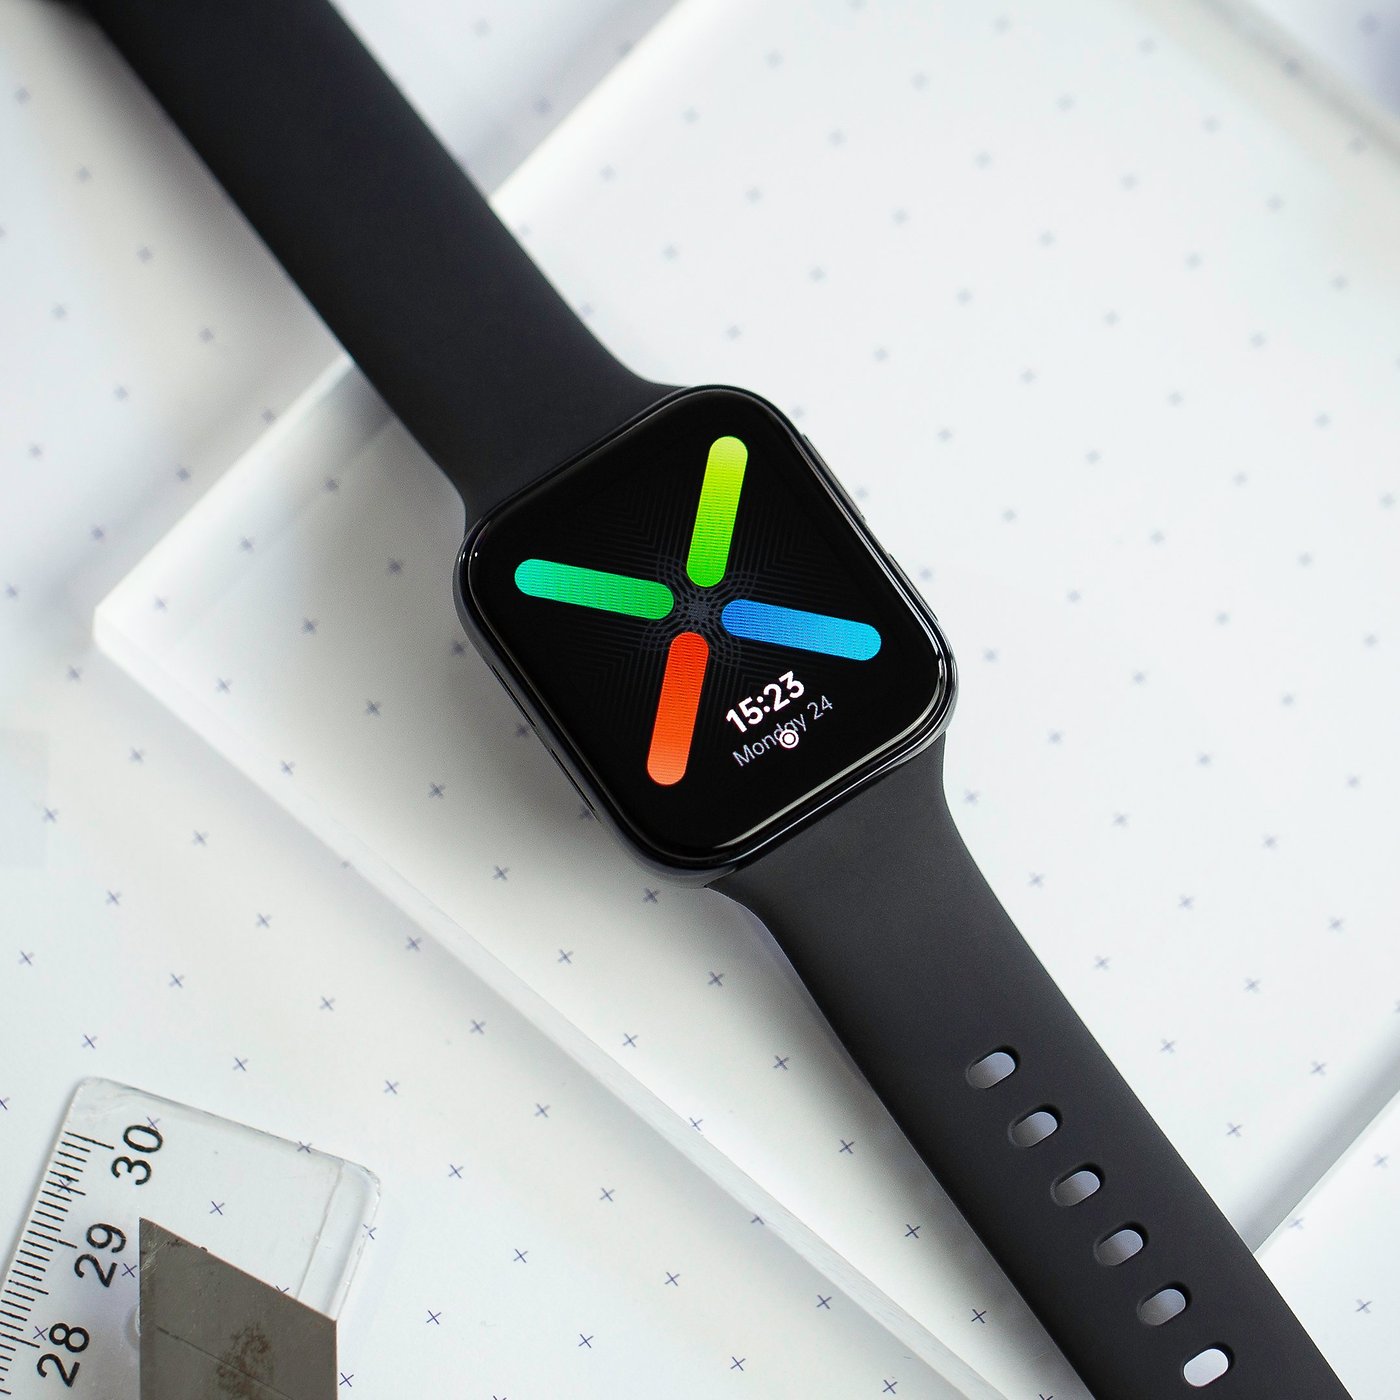 Oppo Watch review: More than an Apple Watch clone